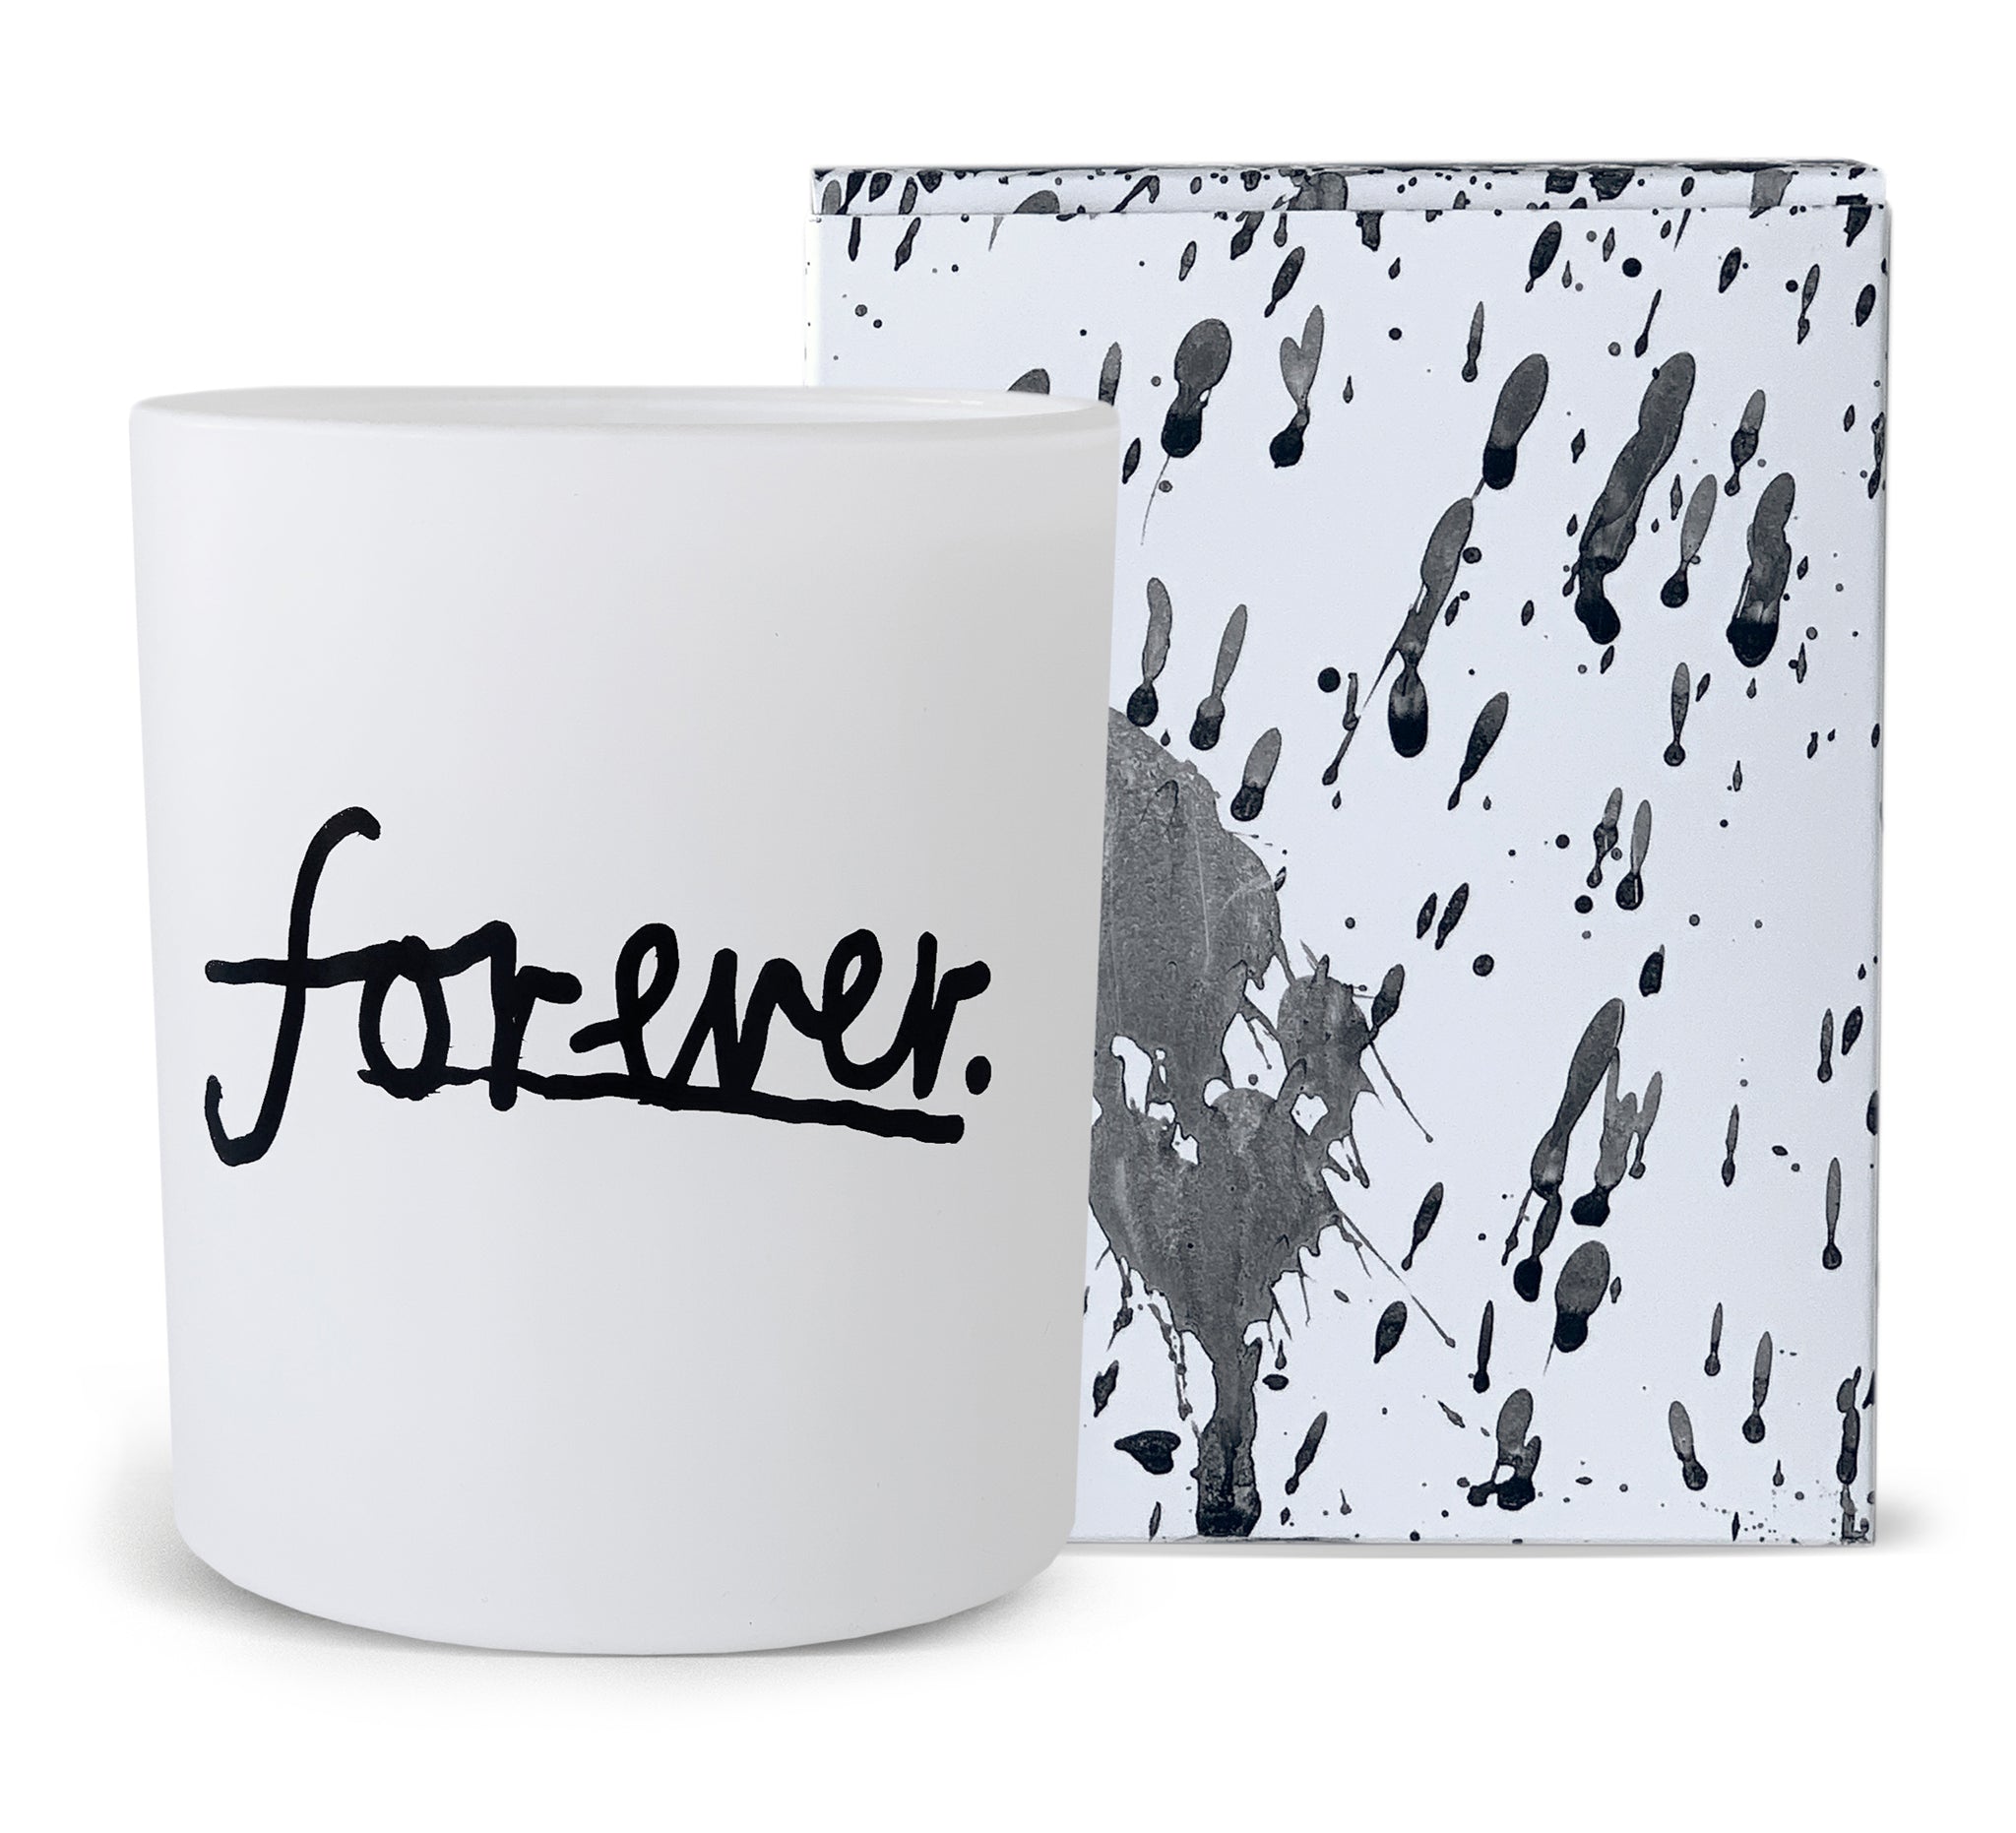 Forever Candle